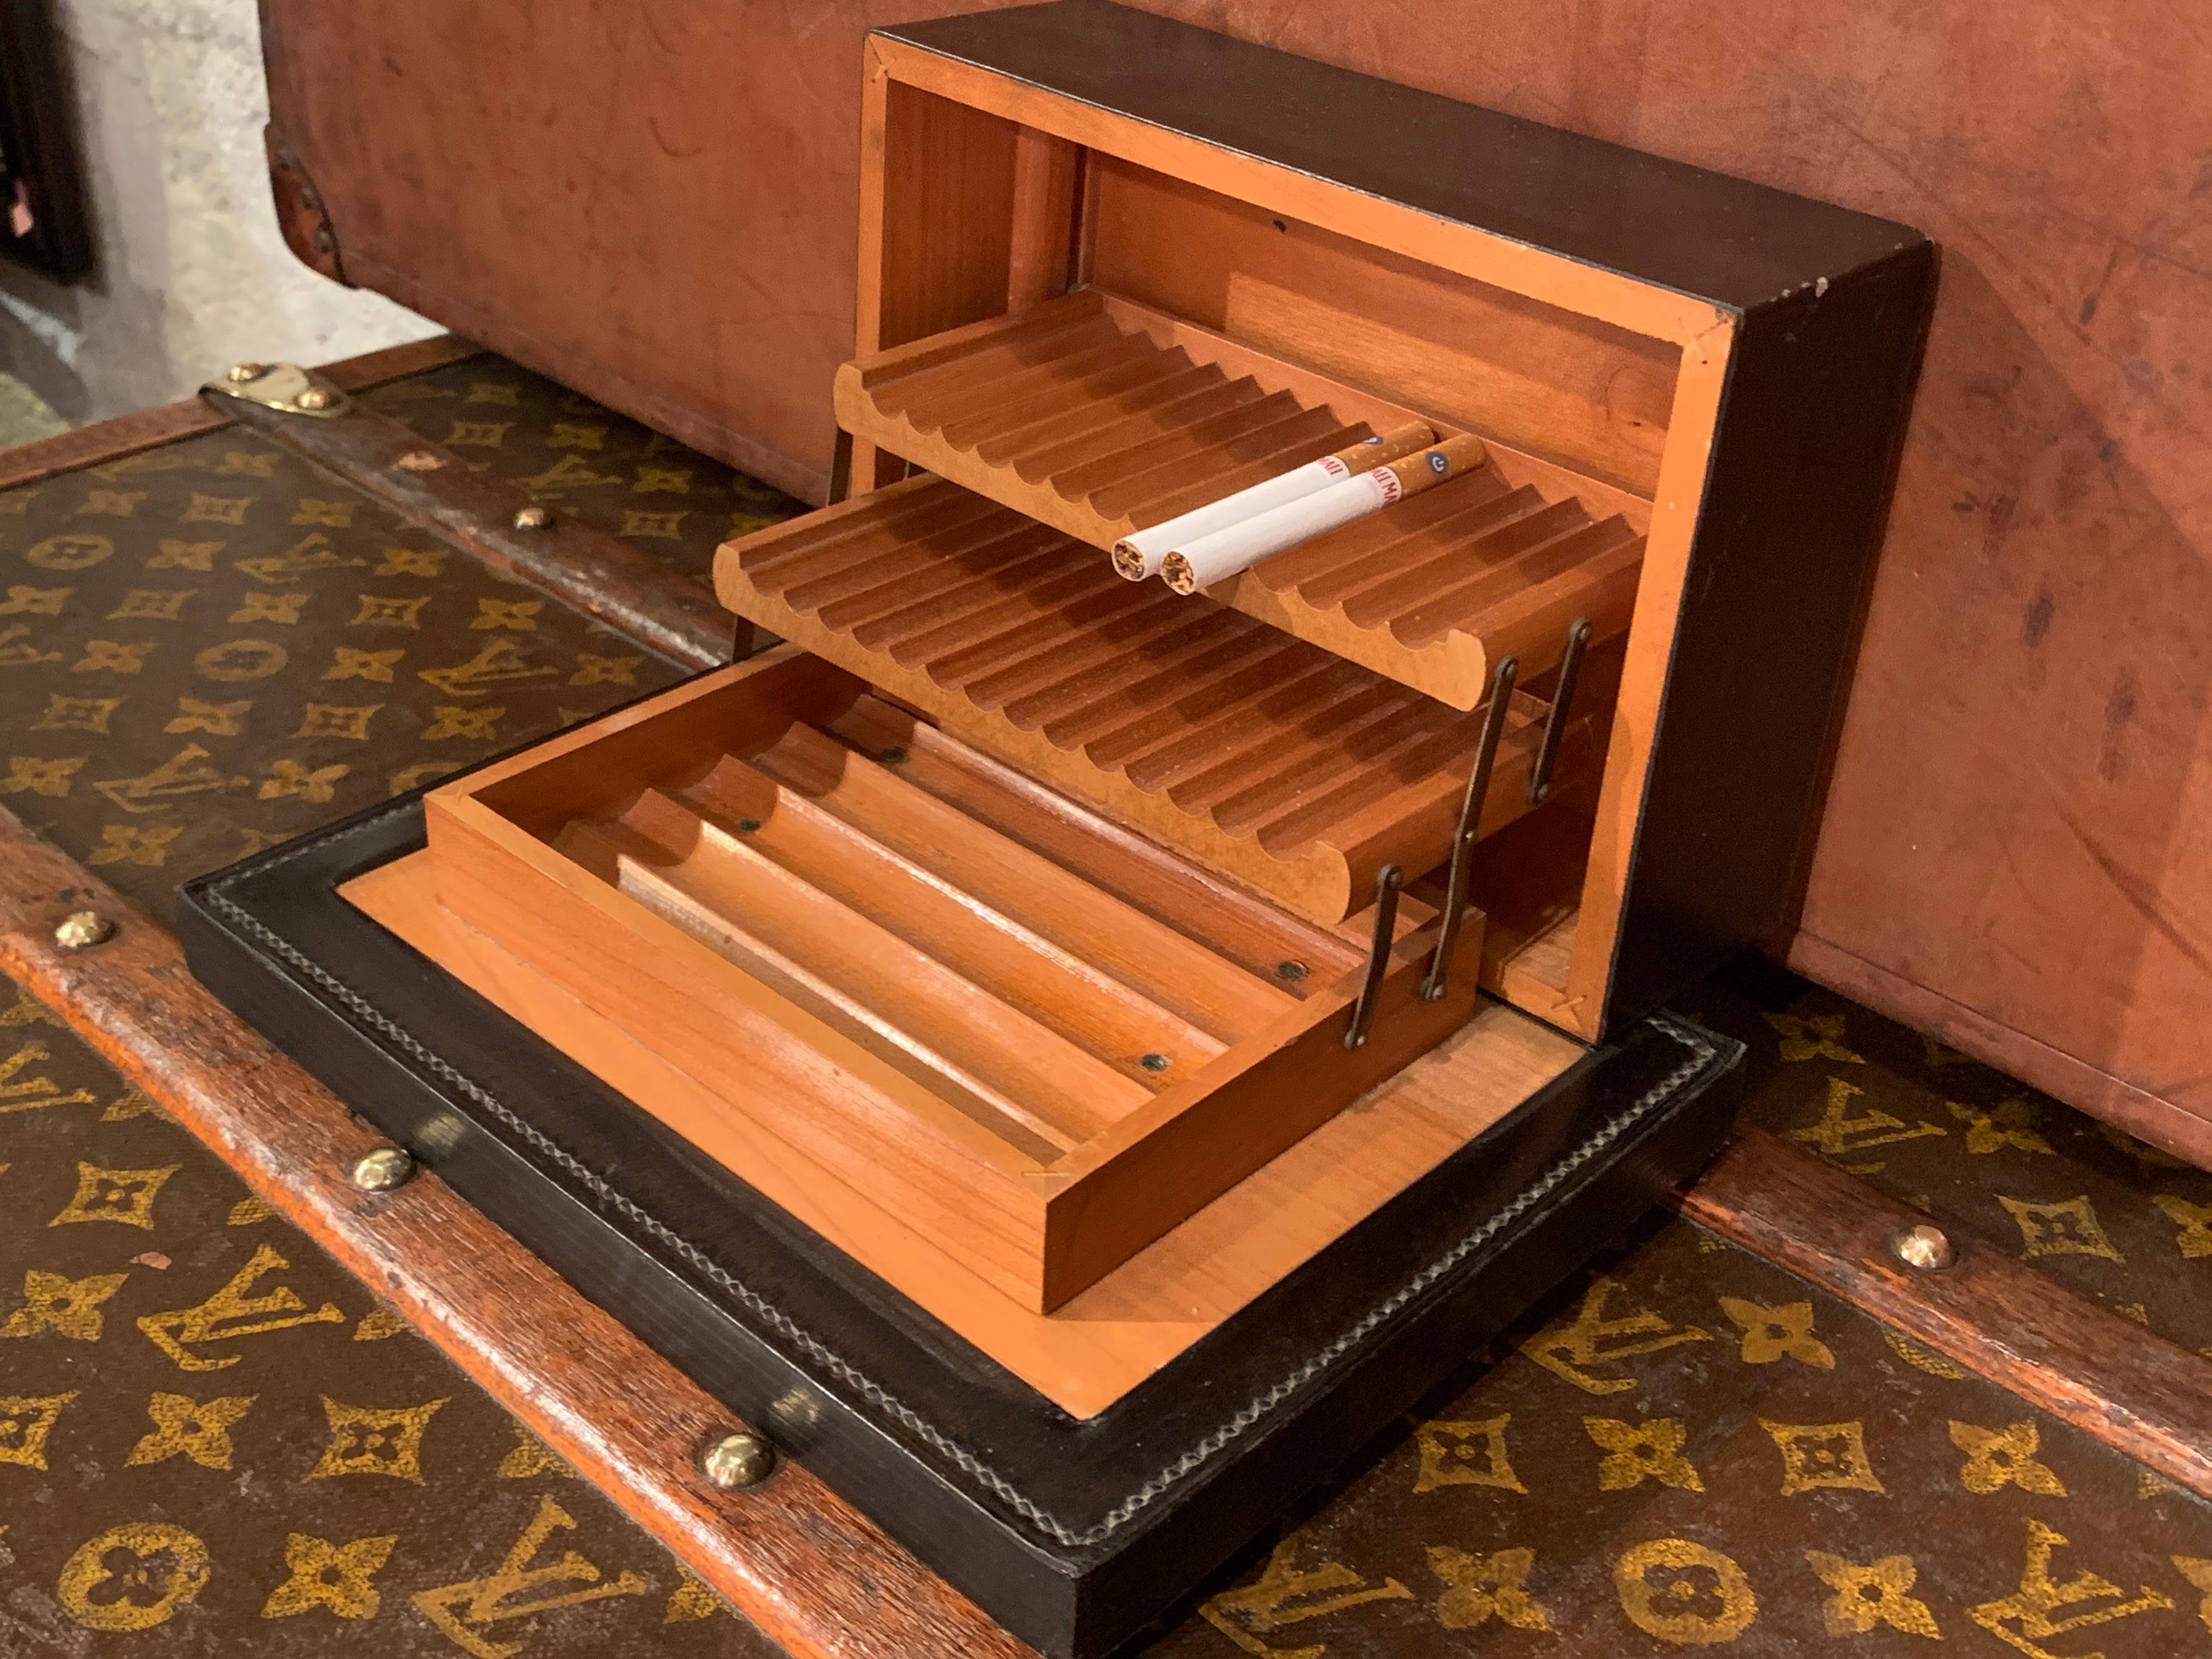 Rare 1950s Hermès cigars and cigarettes box, designed by Paul Dupré-Lafon (1900-1971)
Stamped Hermès/ Paris underneath
Black leather
A beautiful box to display on a desk in your office, with your daily cigarettes and cigars

Condition:
The